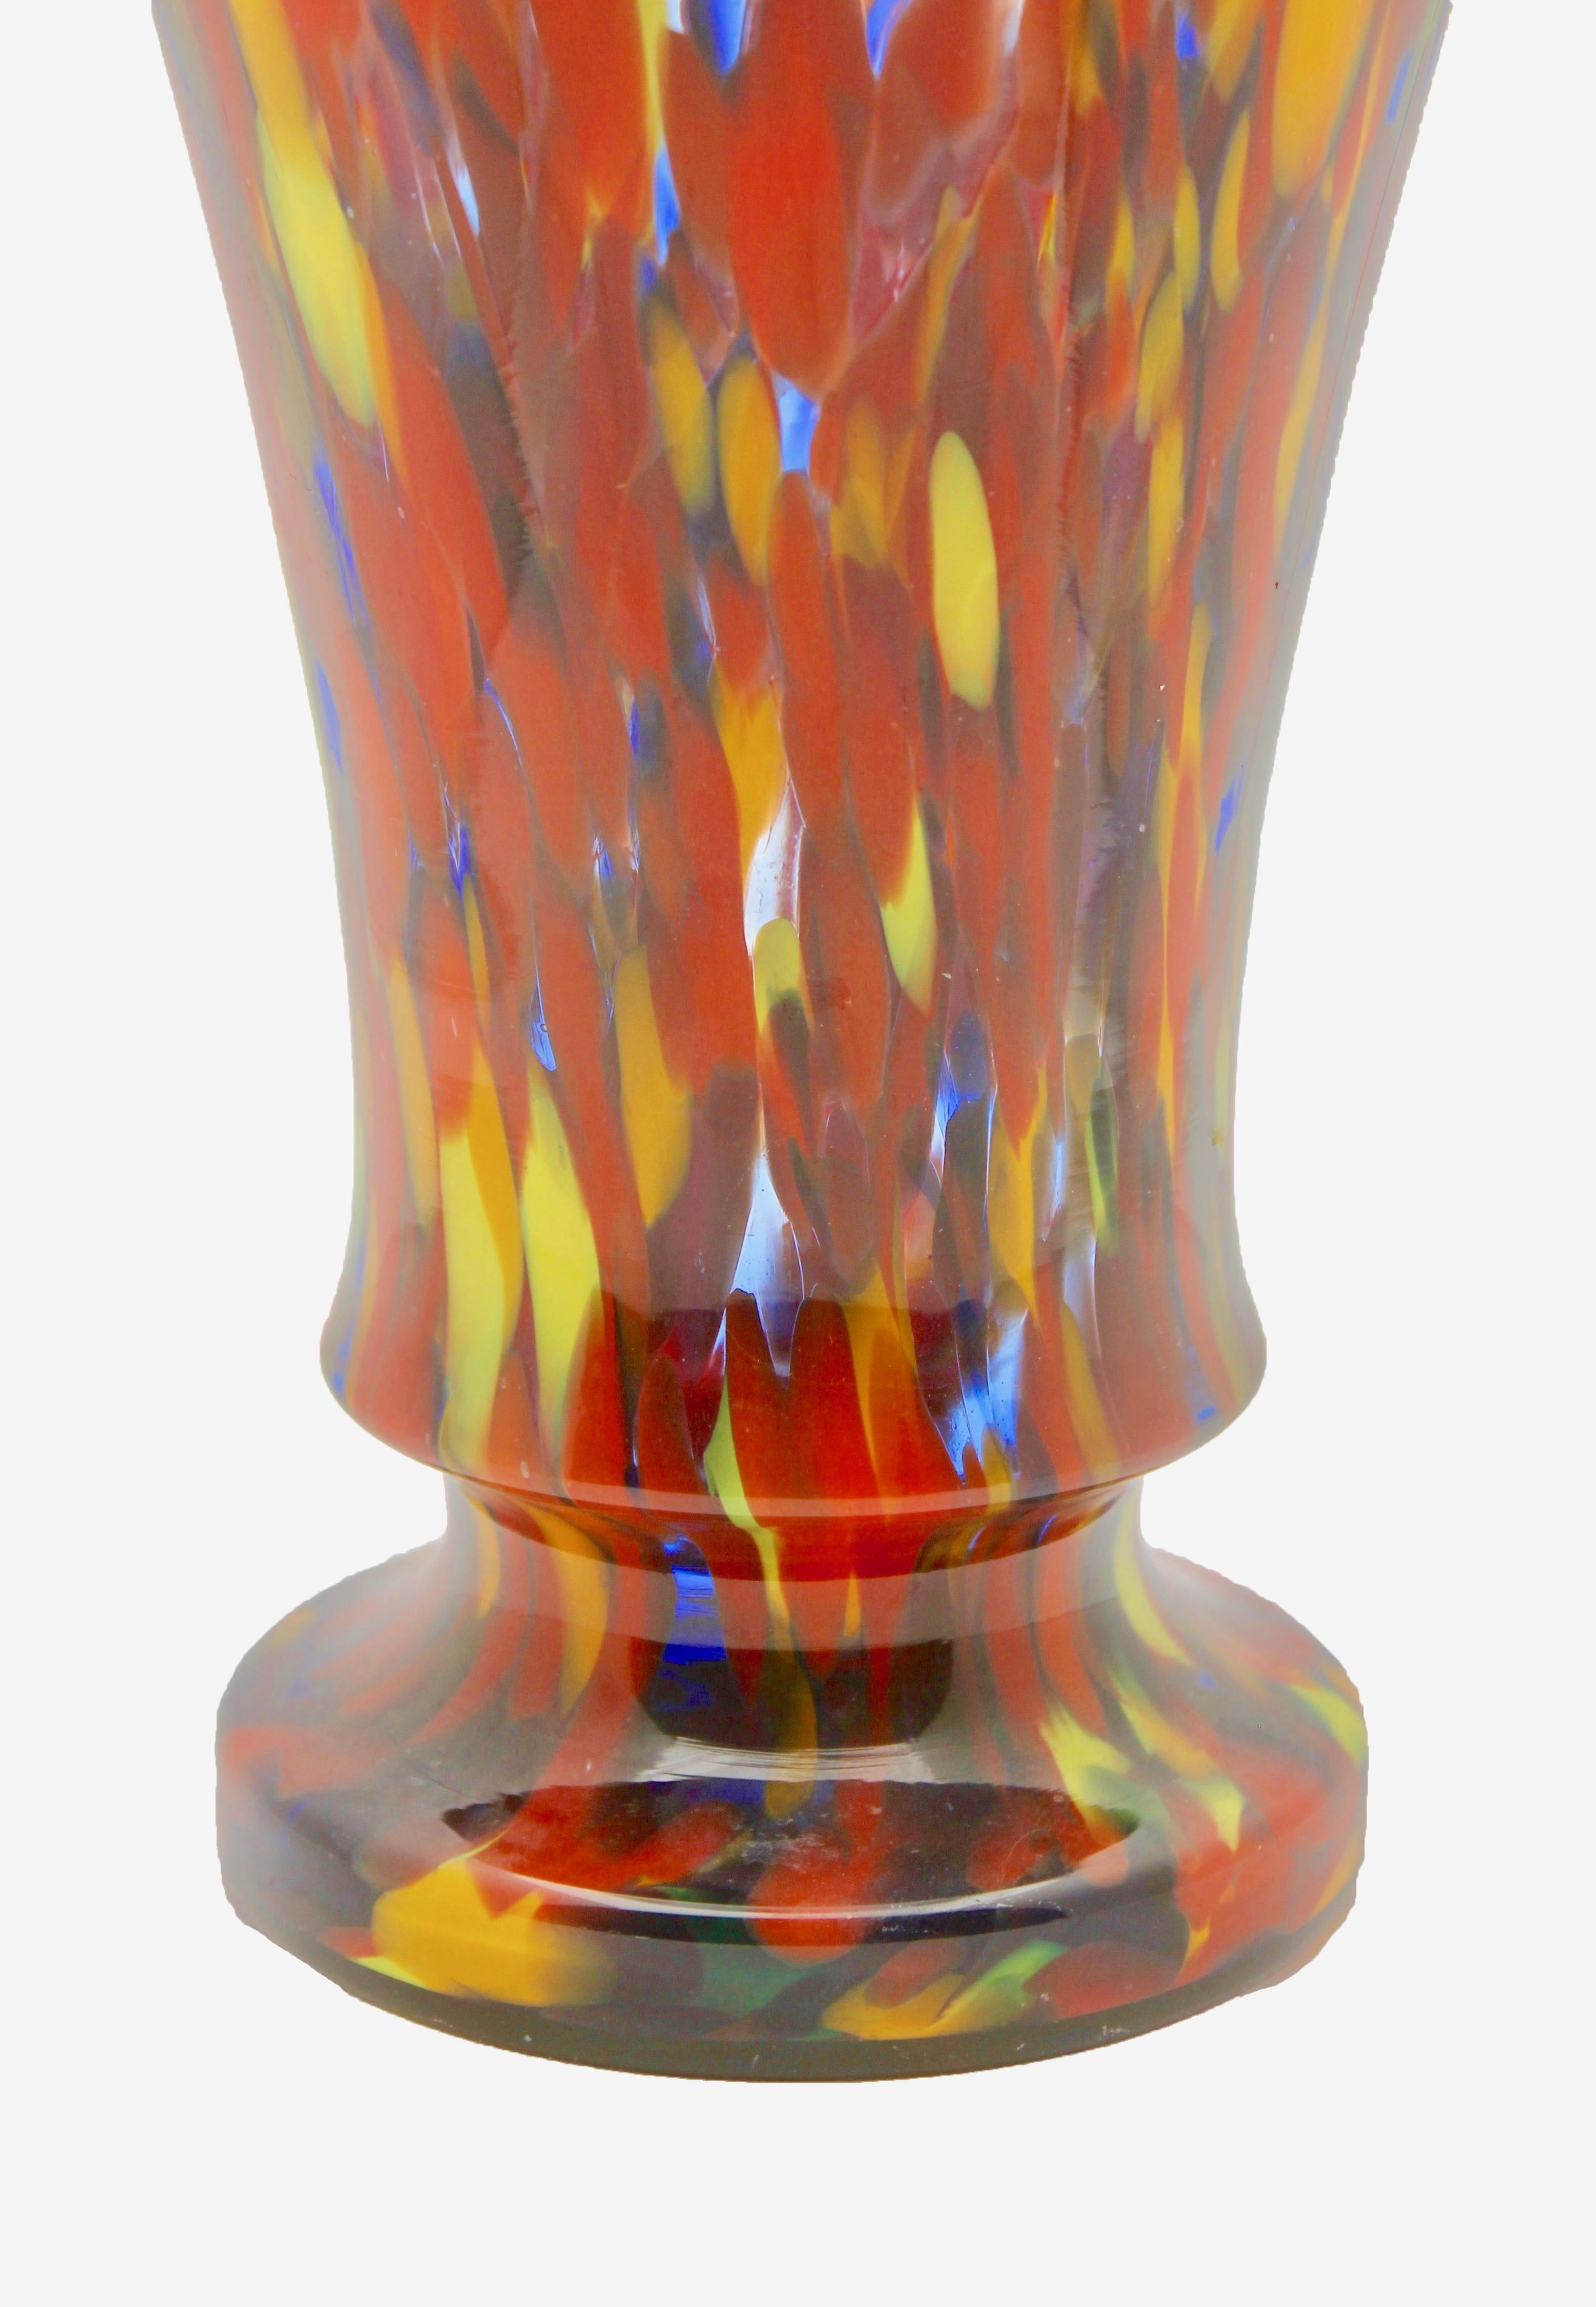 Czech Kralik Baluster Vase with Fire Decor, Multicolored Spatterglass 'End-of-Day'